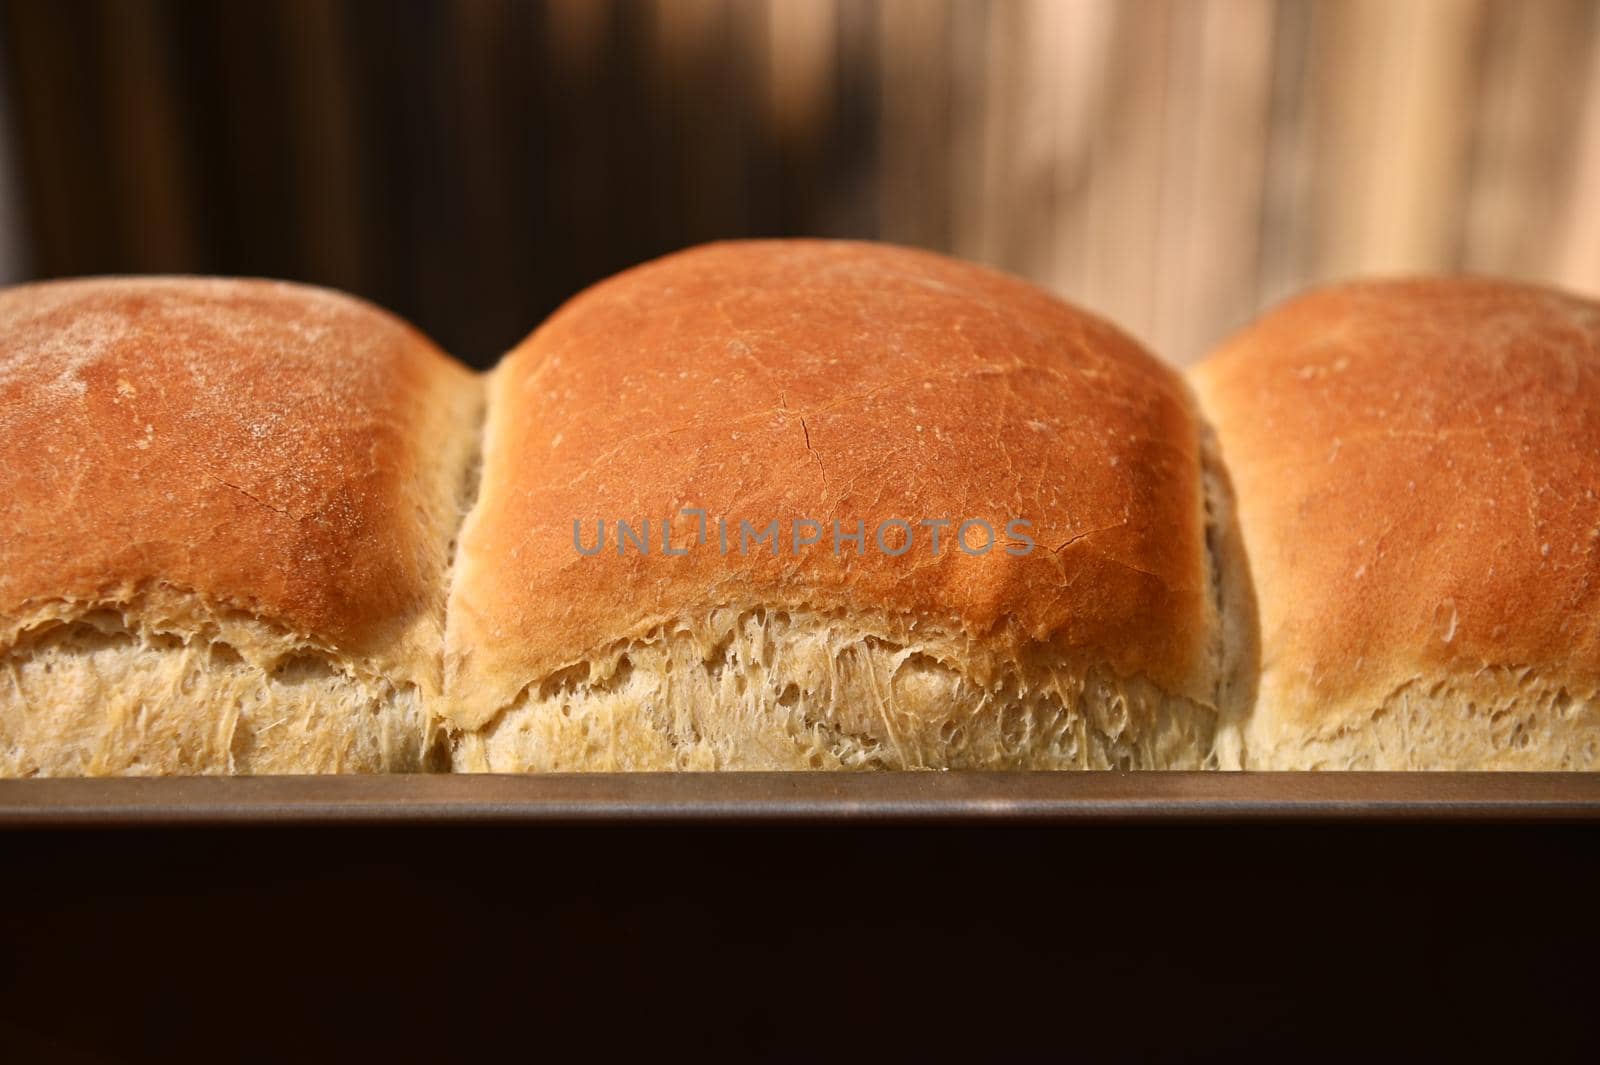 Cropped view of a baking dish with freshly baked hot whole grain bread, on a rustic wooden background with copy ad space for advertising text. Still life. Food composition.